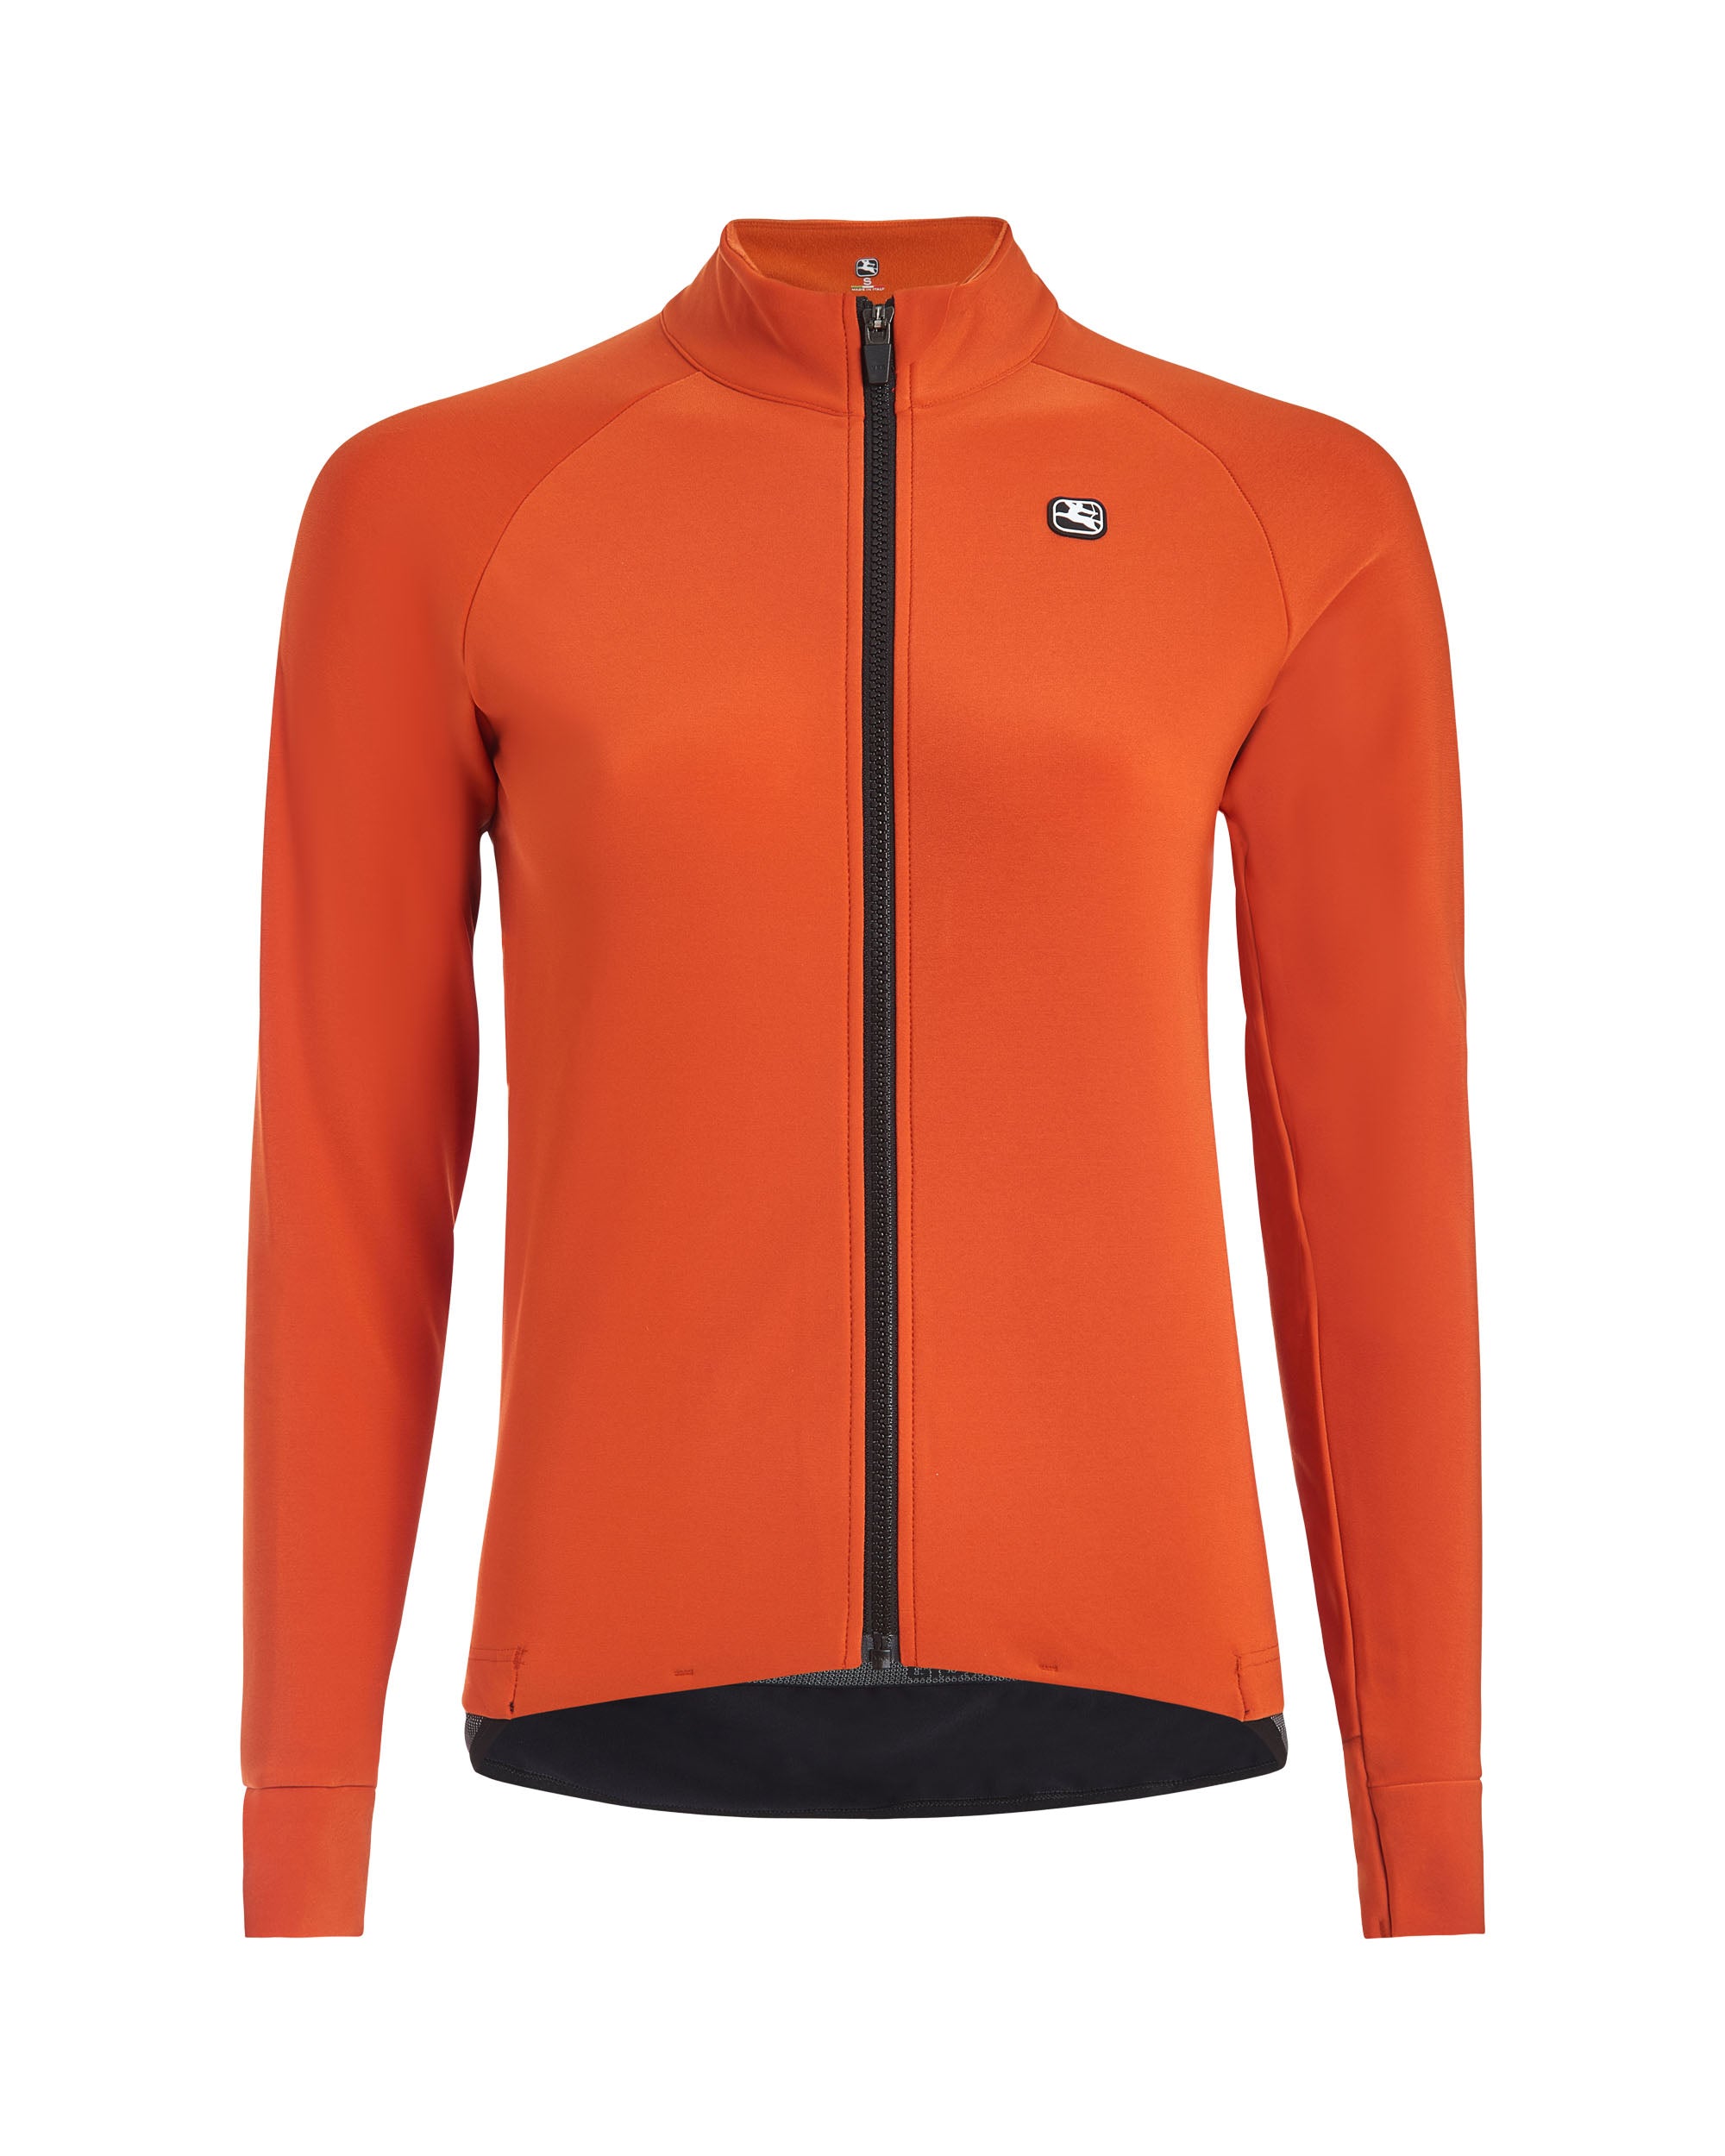 G-Shield Thermal Long Sleeve Jersey